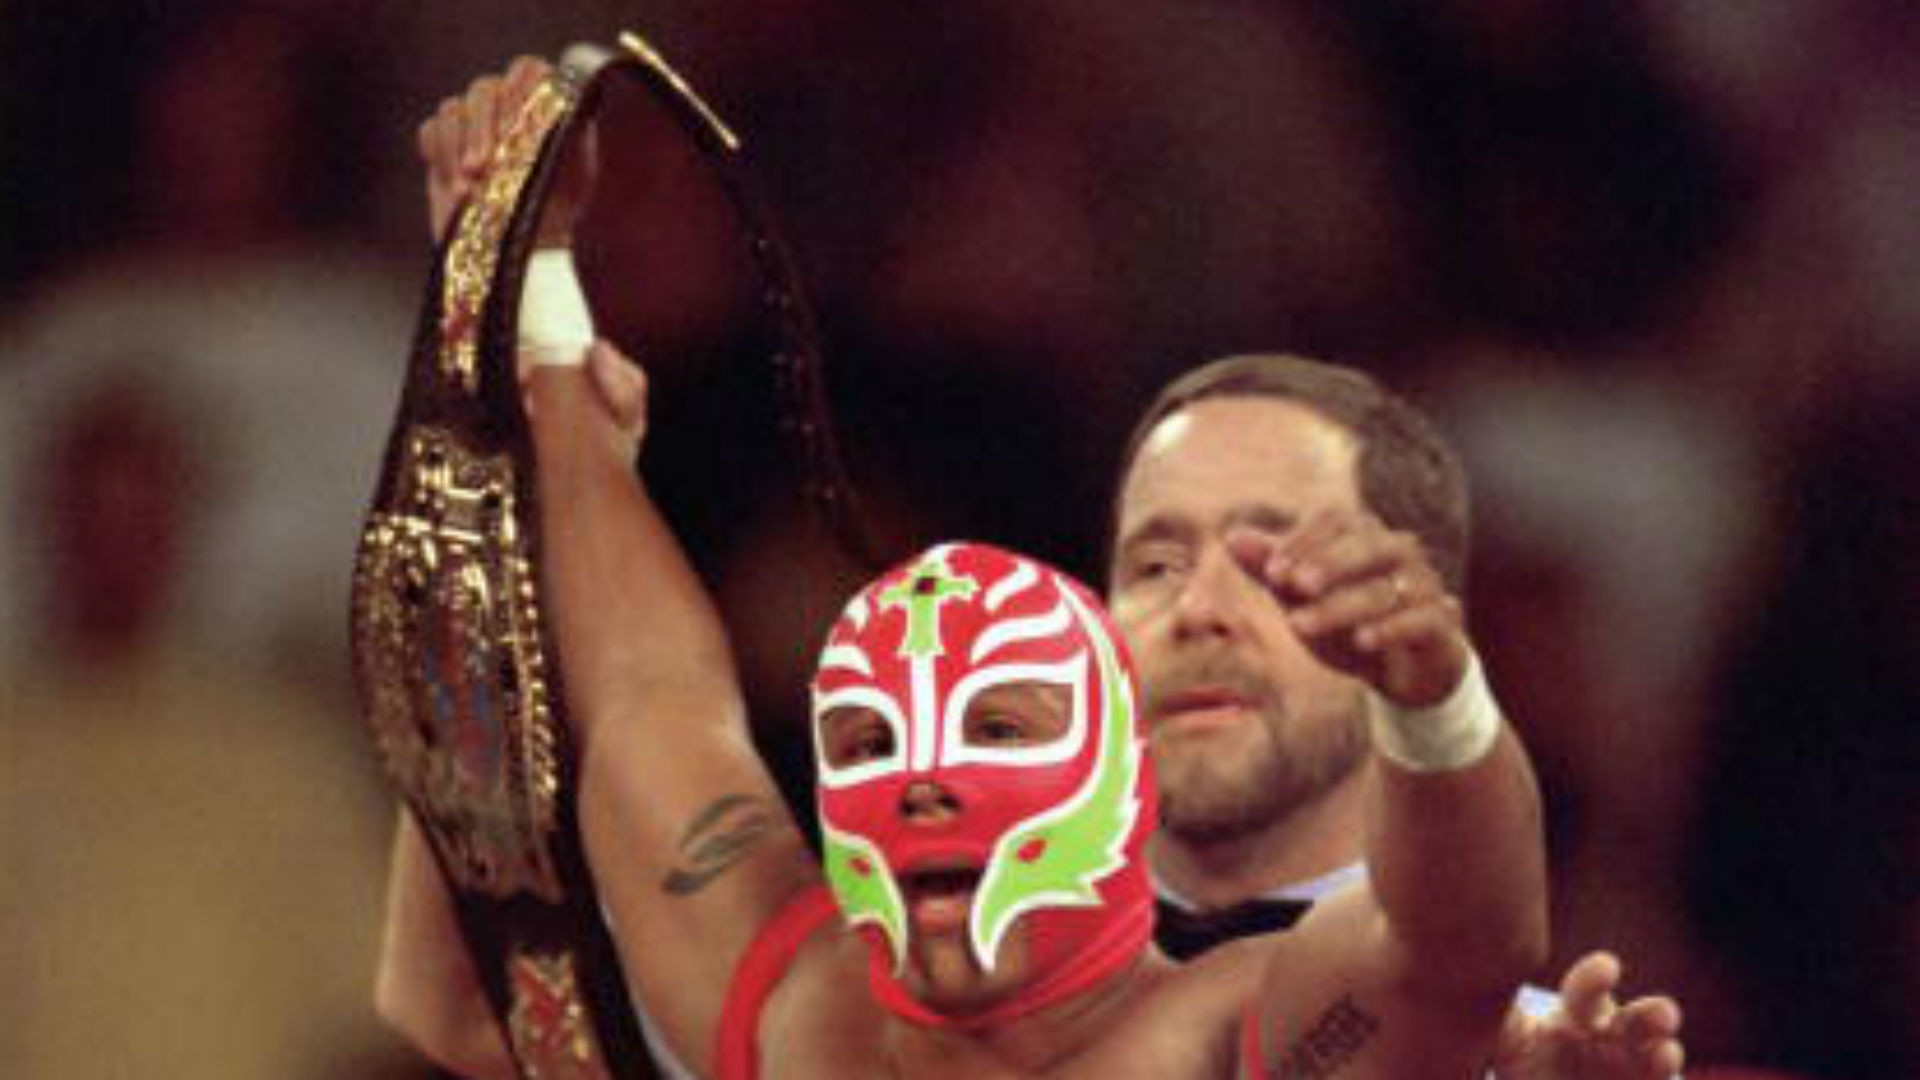 1920x1080 Remembering the time Rey Mysterio won the World Heavyweight Championship |  WWE | Sporting News